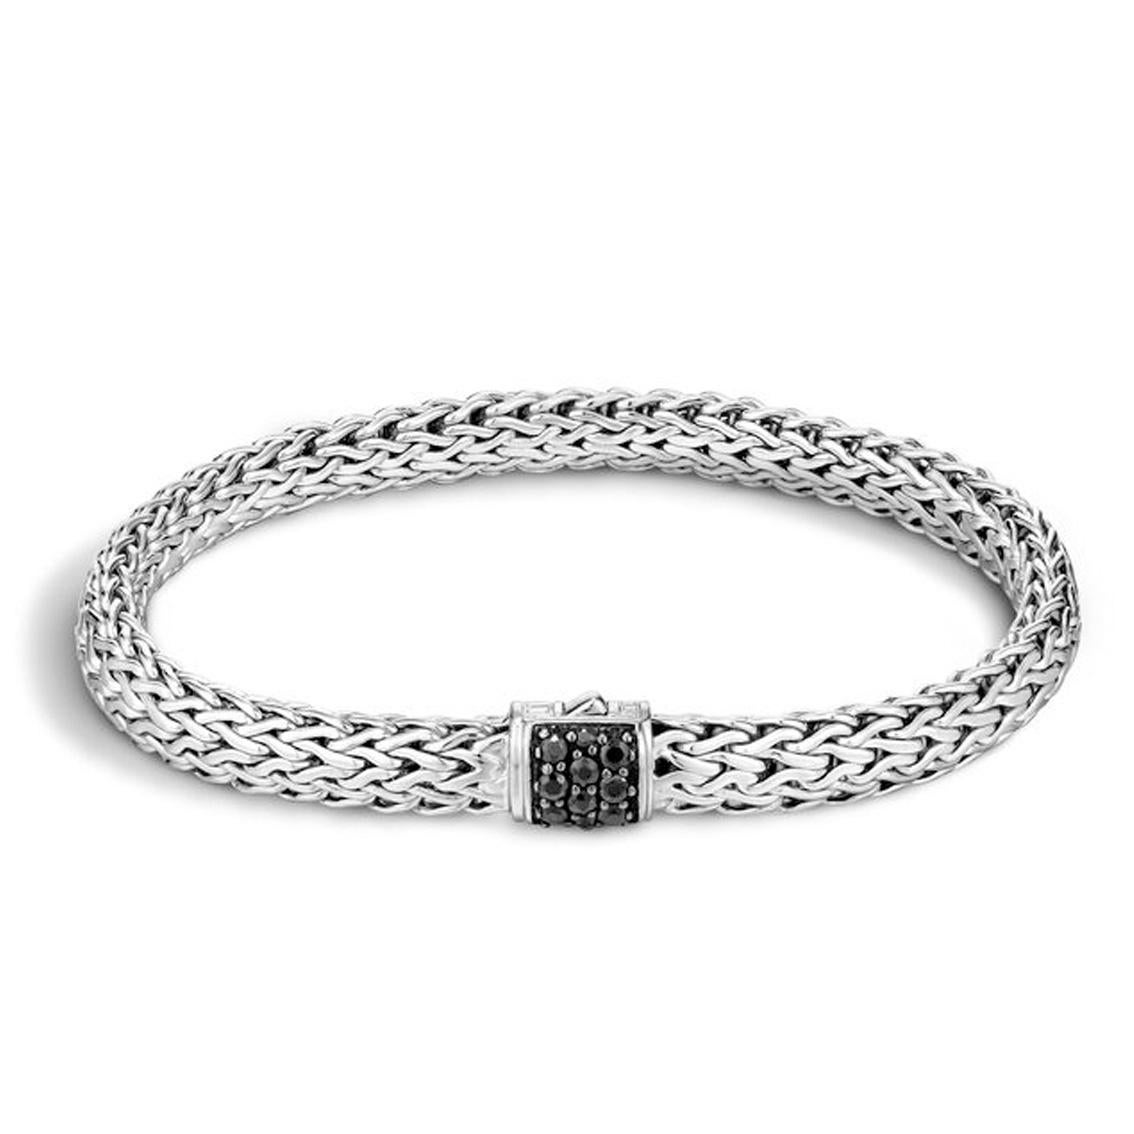 From John Hardy's Classic Chain collection, this sterling silver bracelet features a black sapphire pave set pusher clasp. The bracelet measures 5mm in width and has a length of 7 1/4 inches.

Sku 1700